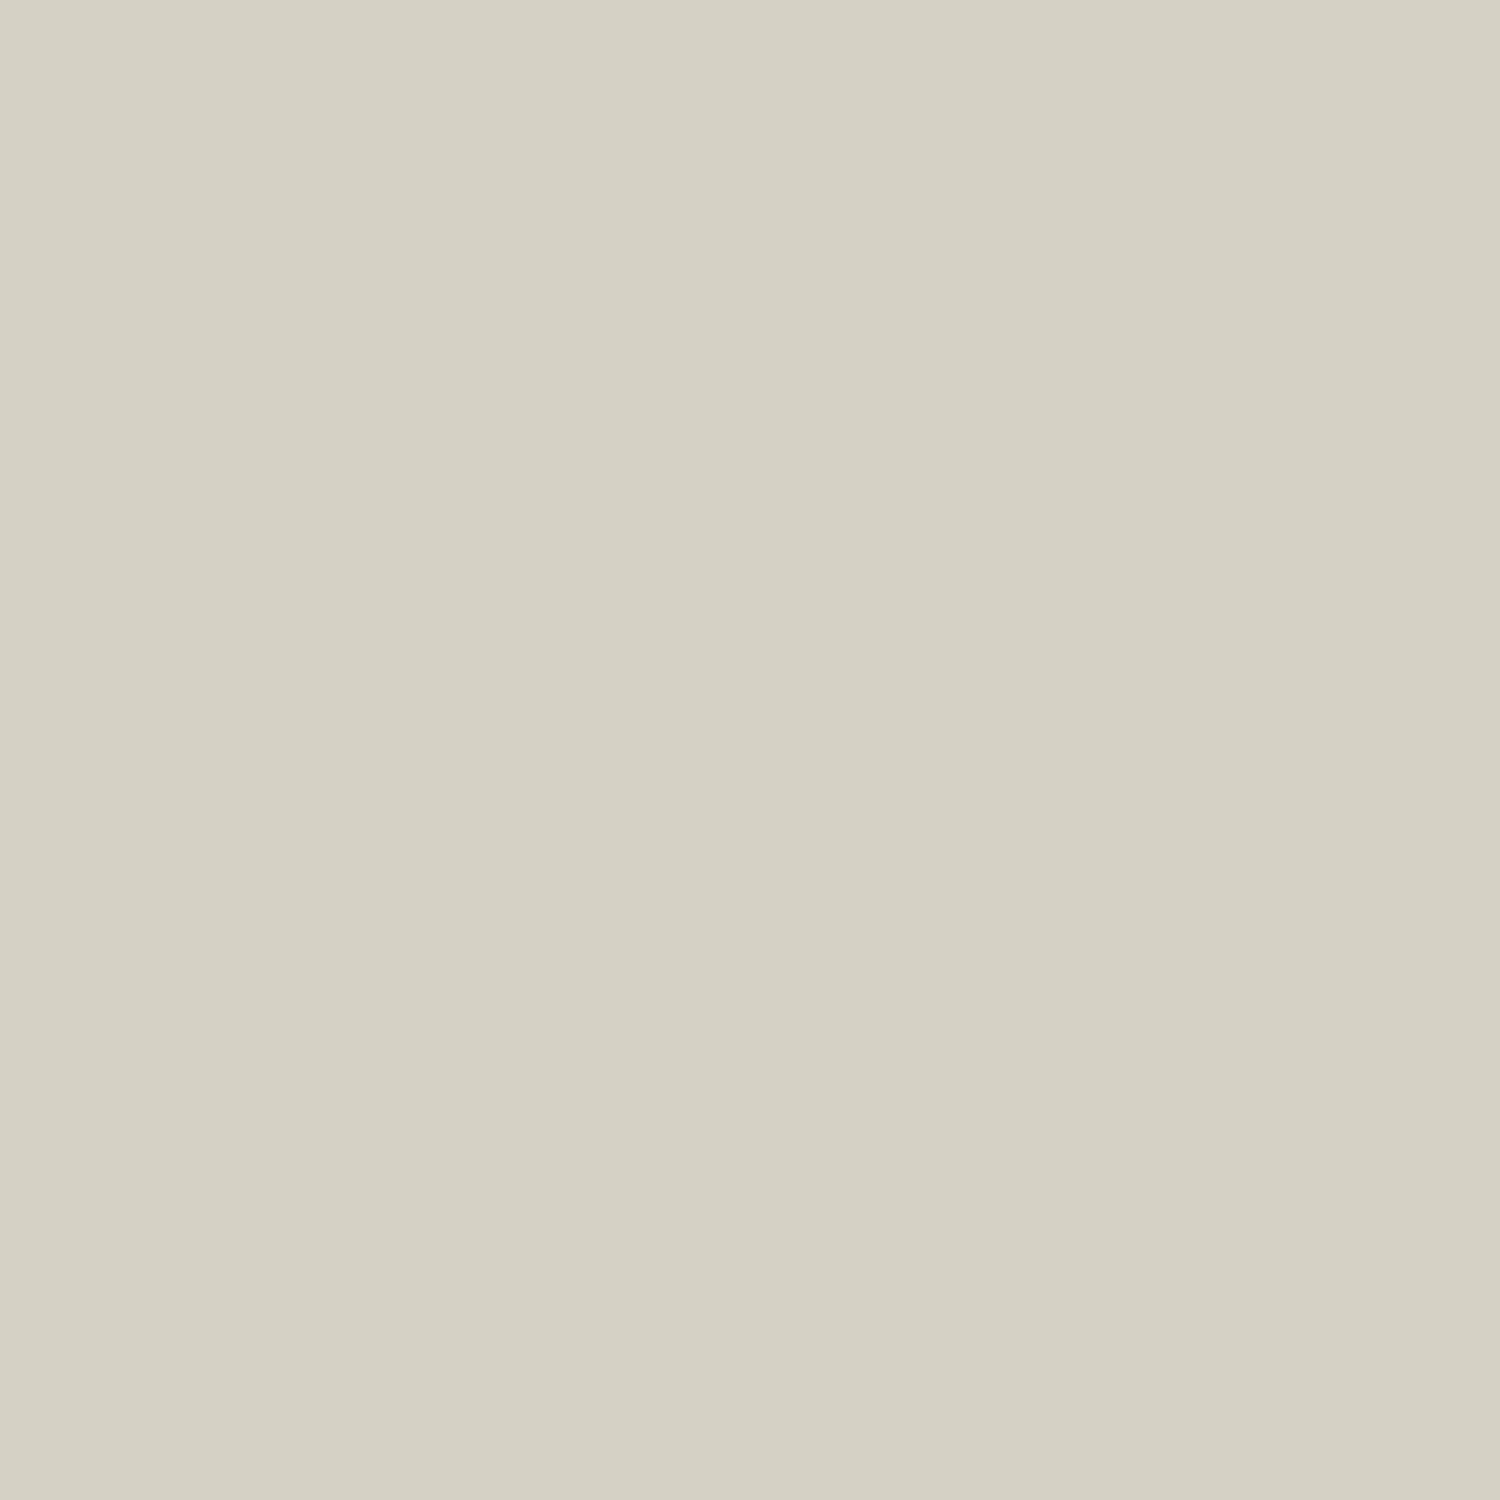 Carbon particle board 16 mm beige grey 8110 2 sides